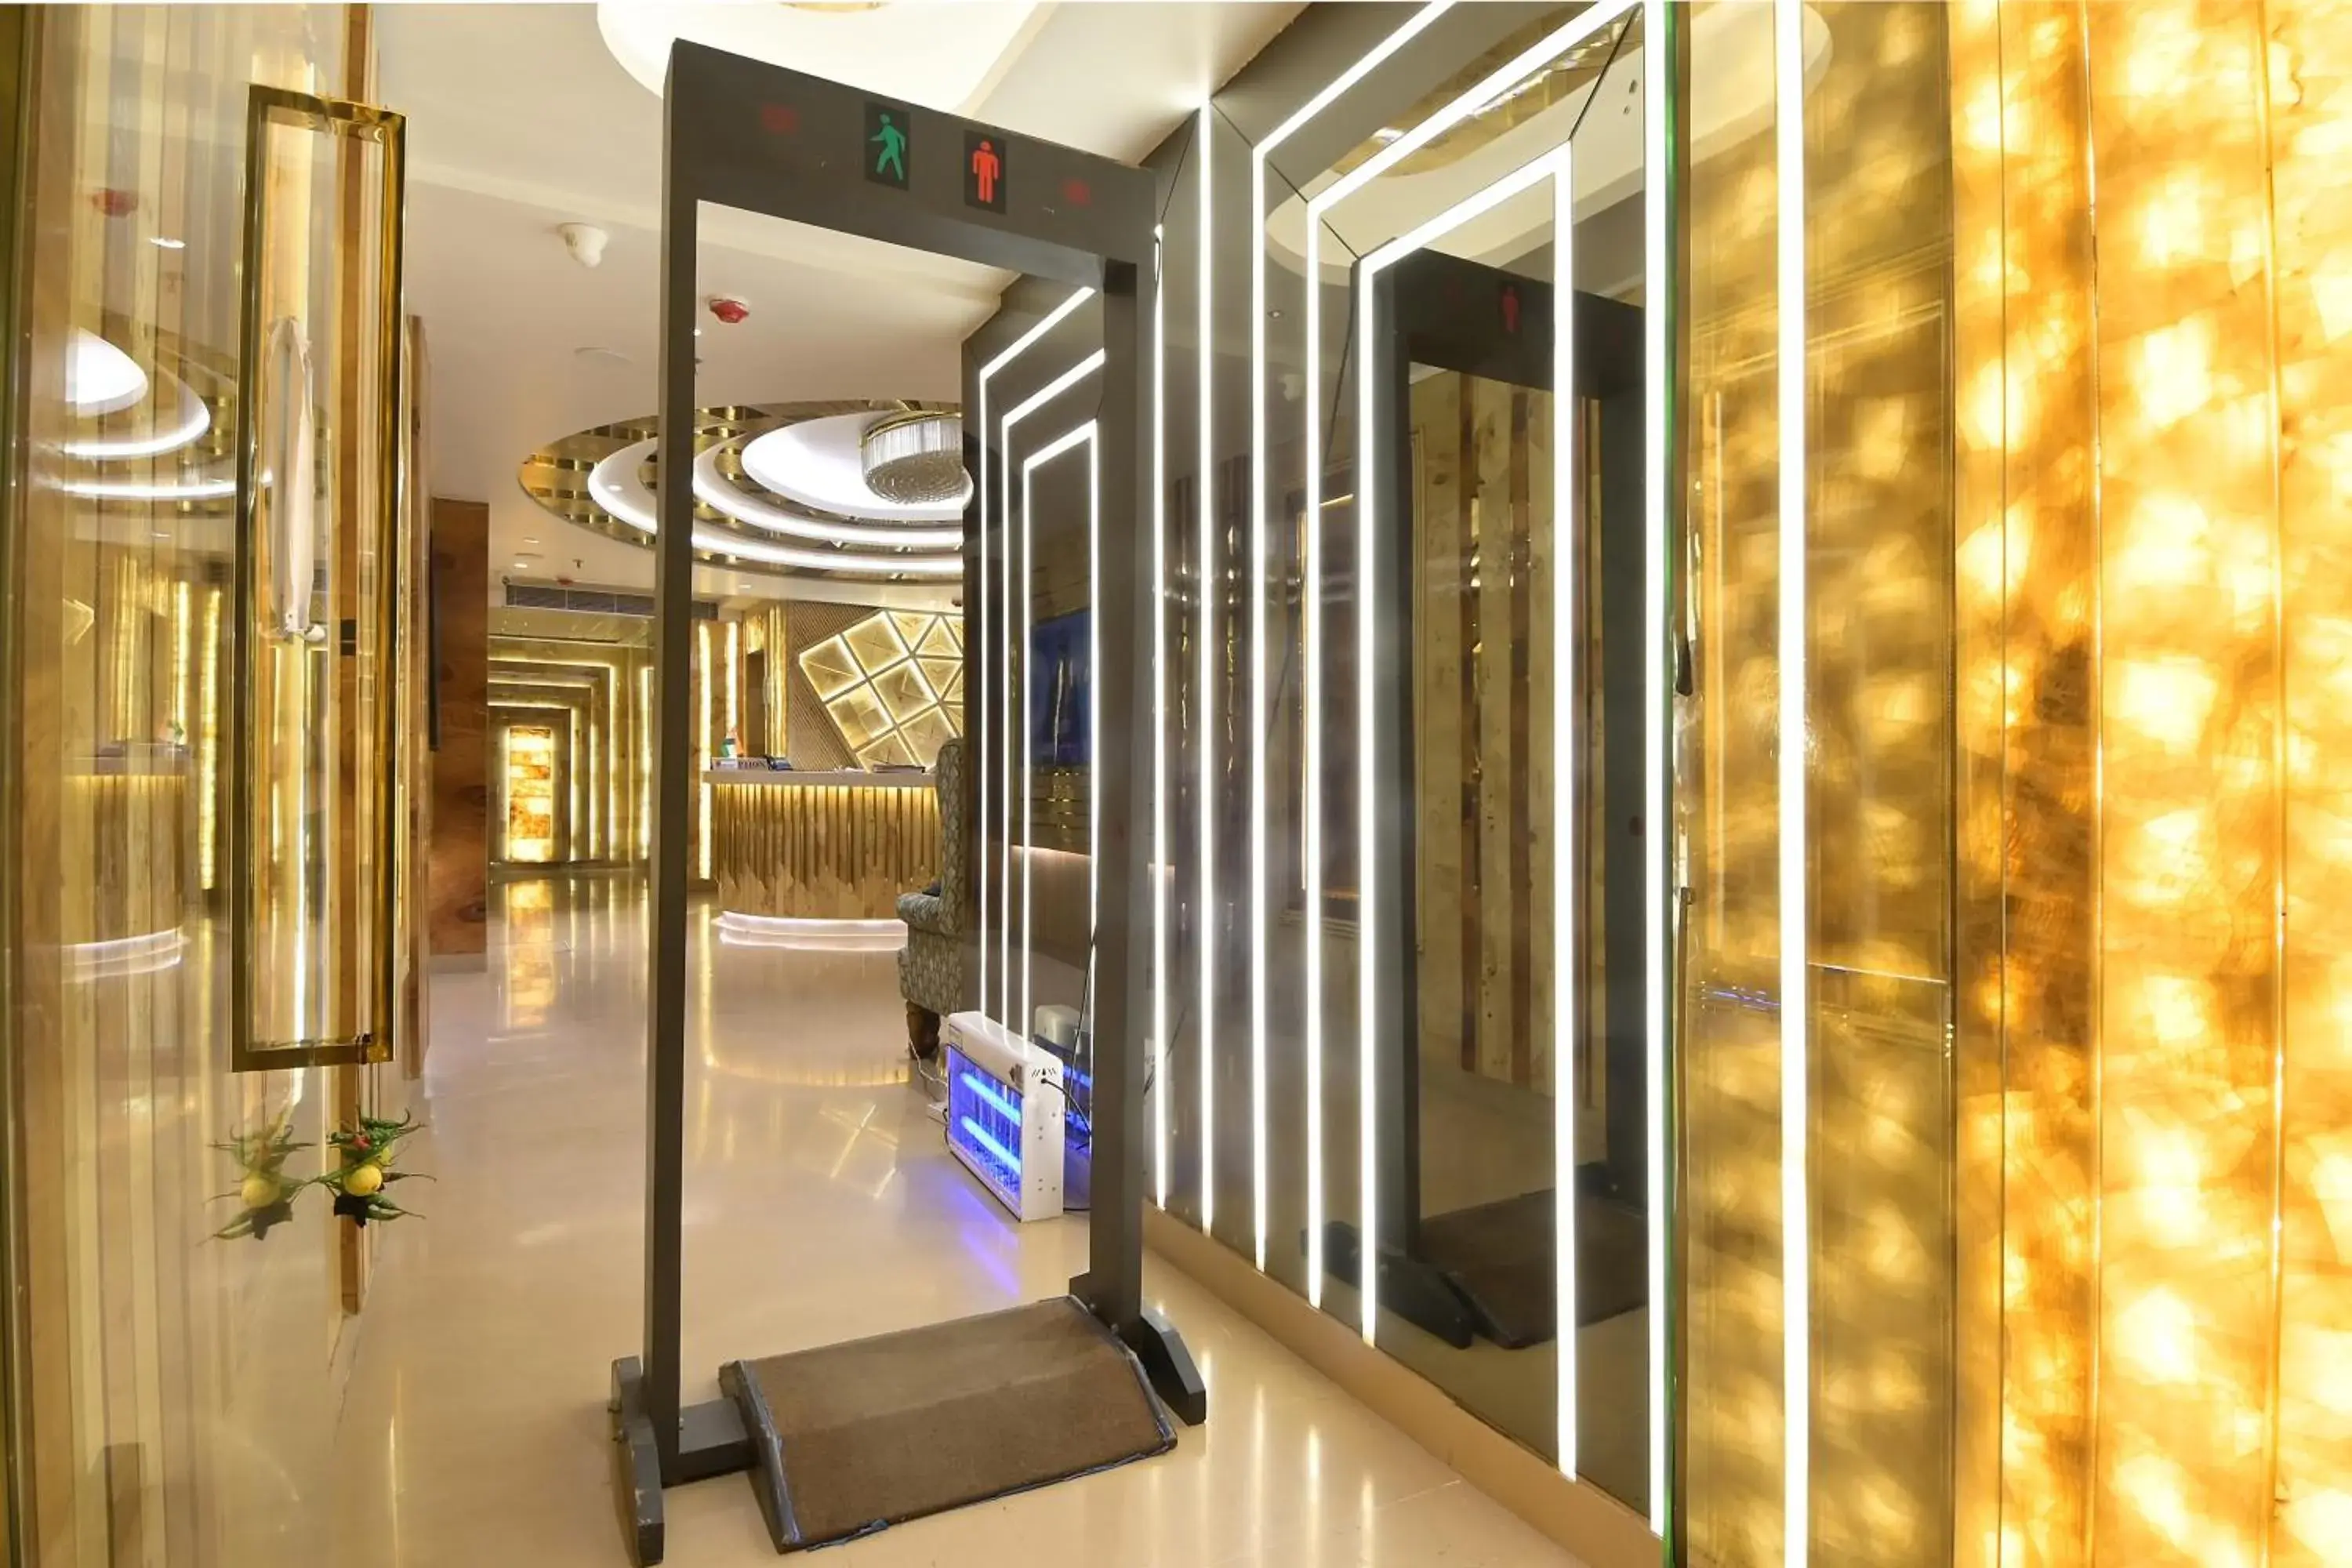 Facade/entrance in Hotel Gold Palace - 03 Mins Walk From New Delhi Railway Station